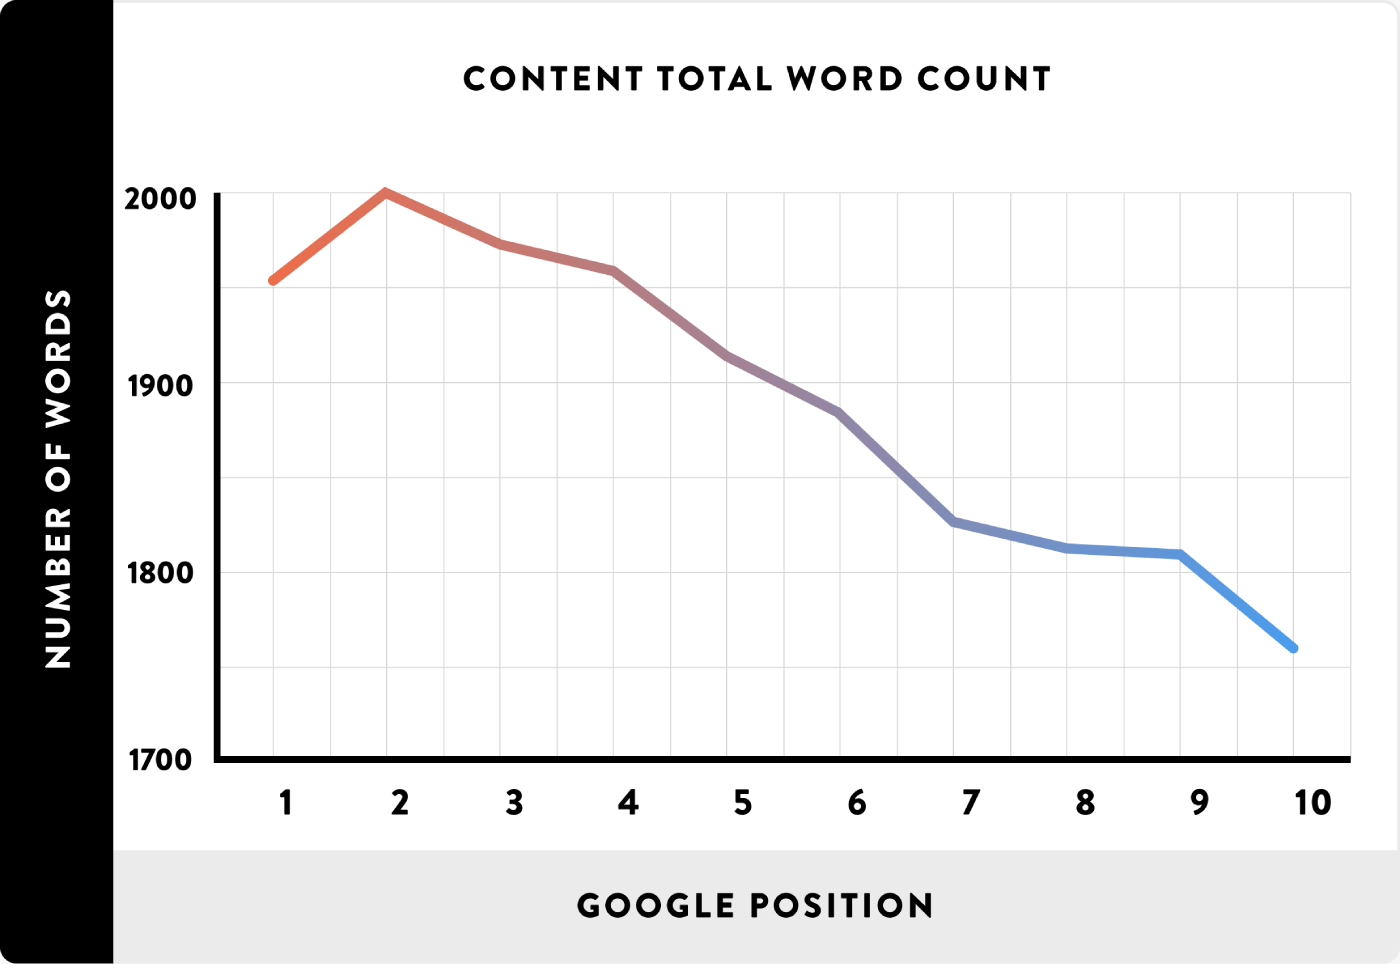 Content total word count